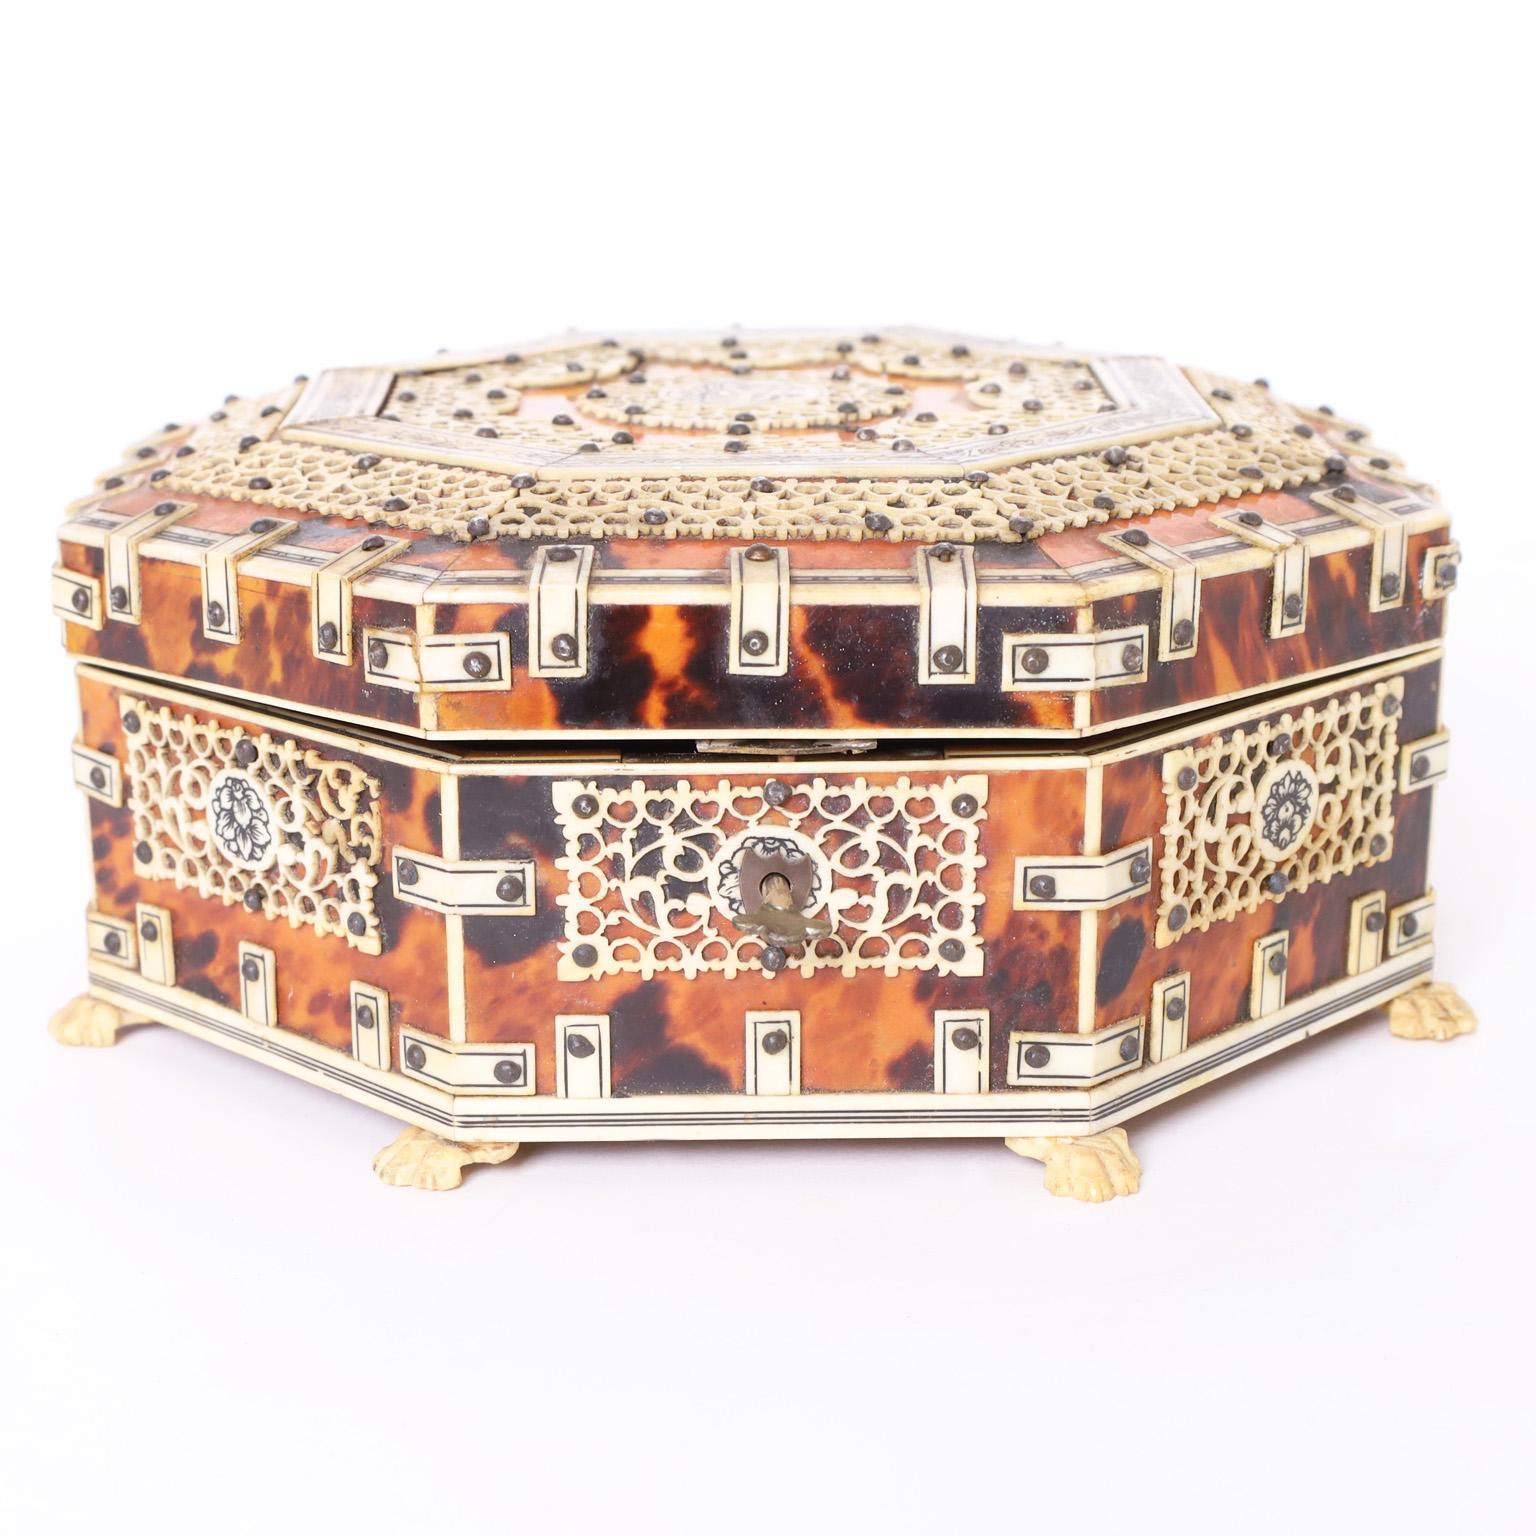 Lofty 19th century Anglo Indian octagon form lidded box handcrafted in wood clad in tortoise shell and ambitiously decorated with floral and geometric designs in bone with a center medallion of a tiger and eight cat paw feet. The inside in lined